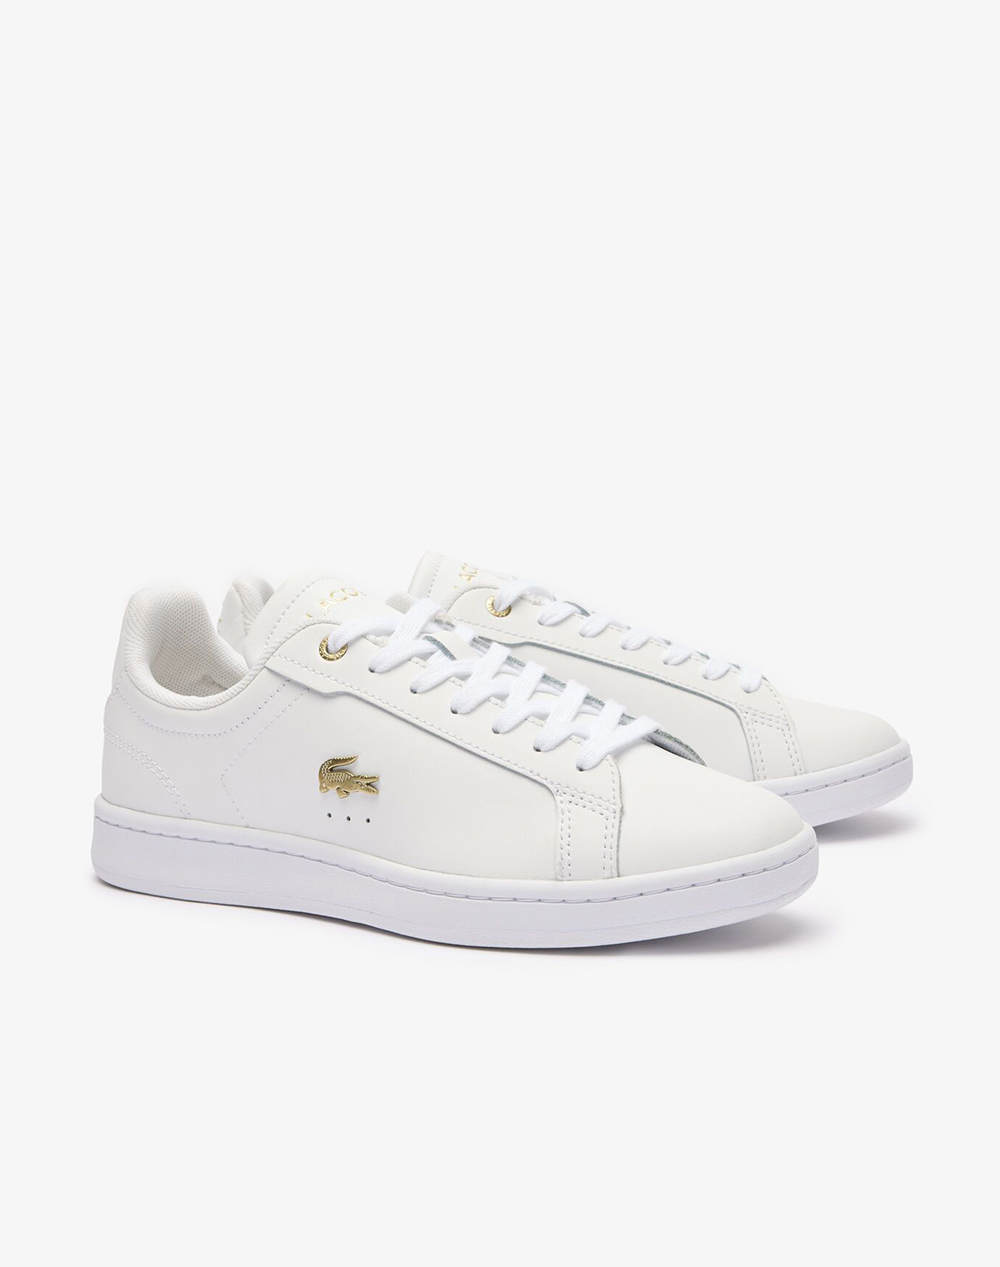 LACOSTE WOMENS SHOES CARNABY PRO 124 1 SFA CARNABY PRO 124 1 SFA